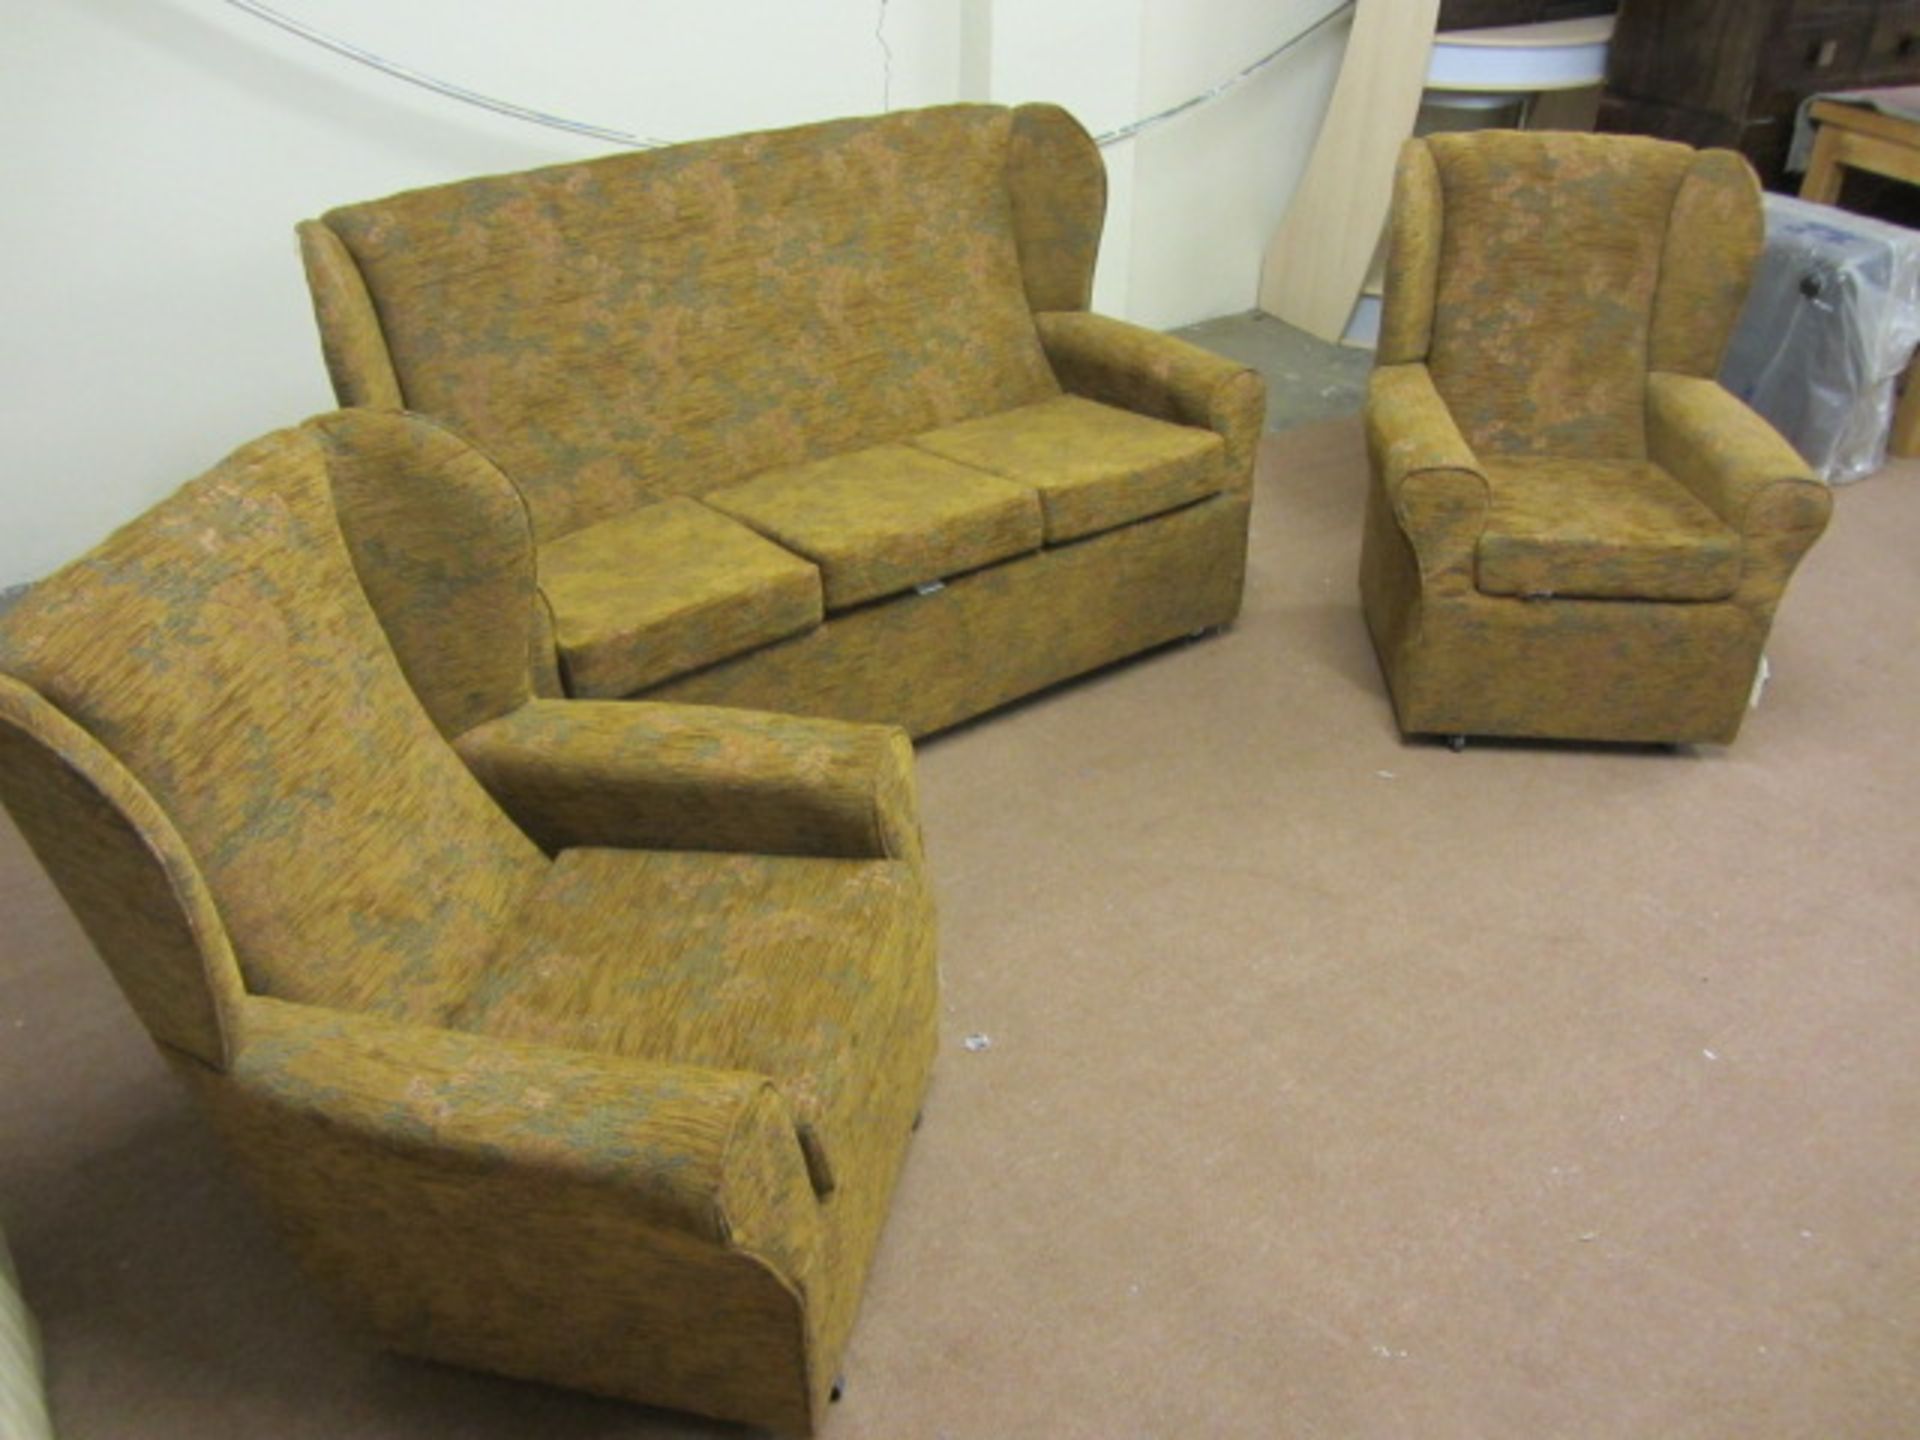 Cottage Style, 3 Seater & 2 Chairs, Brown/Gold Floral Tapestry type fabric, Reversible base cushions - Image 2 of 3